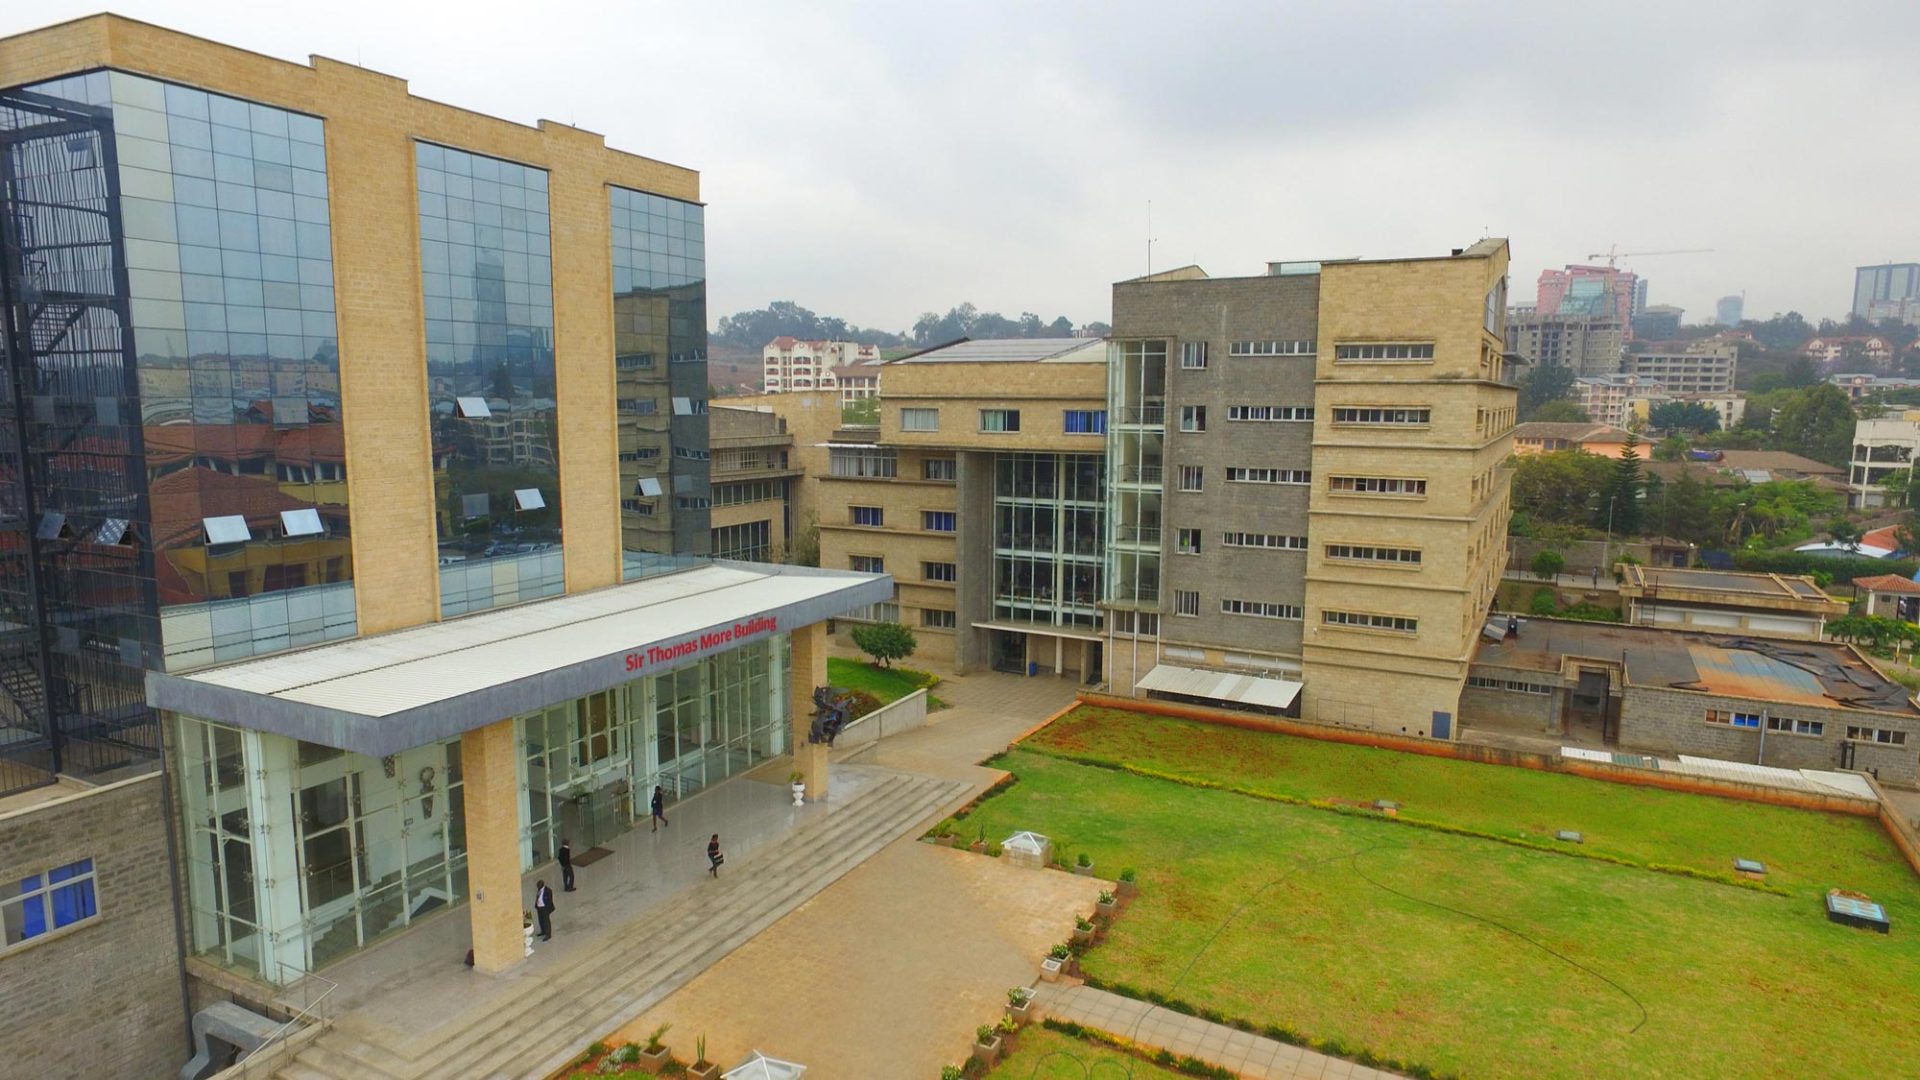 Strathmore University: The First Pre-Indendence Higher Learning Institution To Admit Students Of All Races